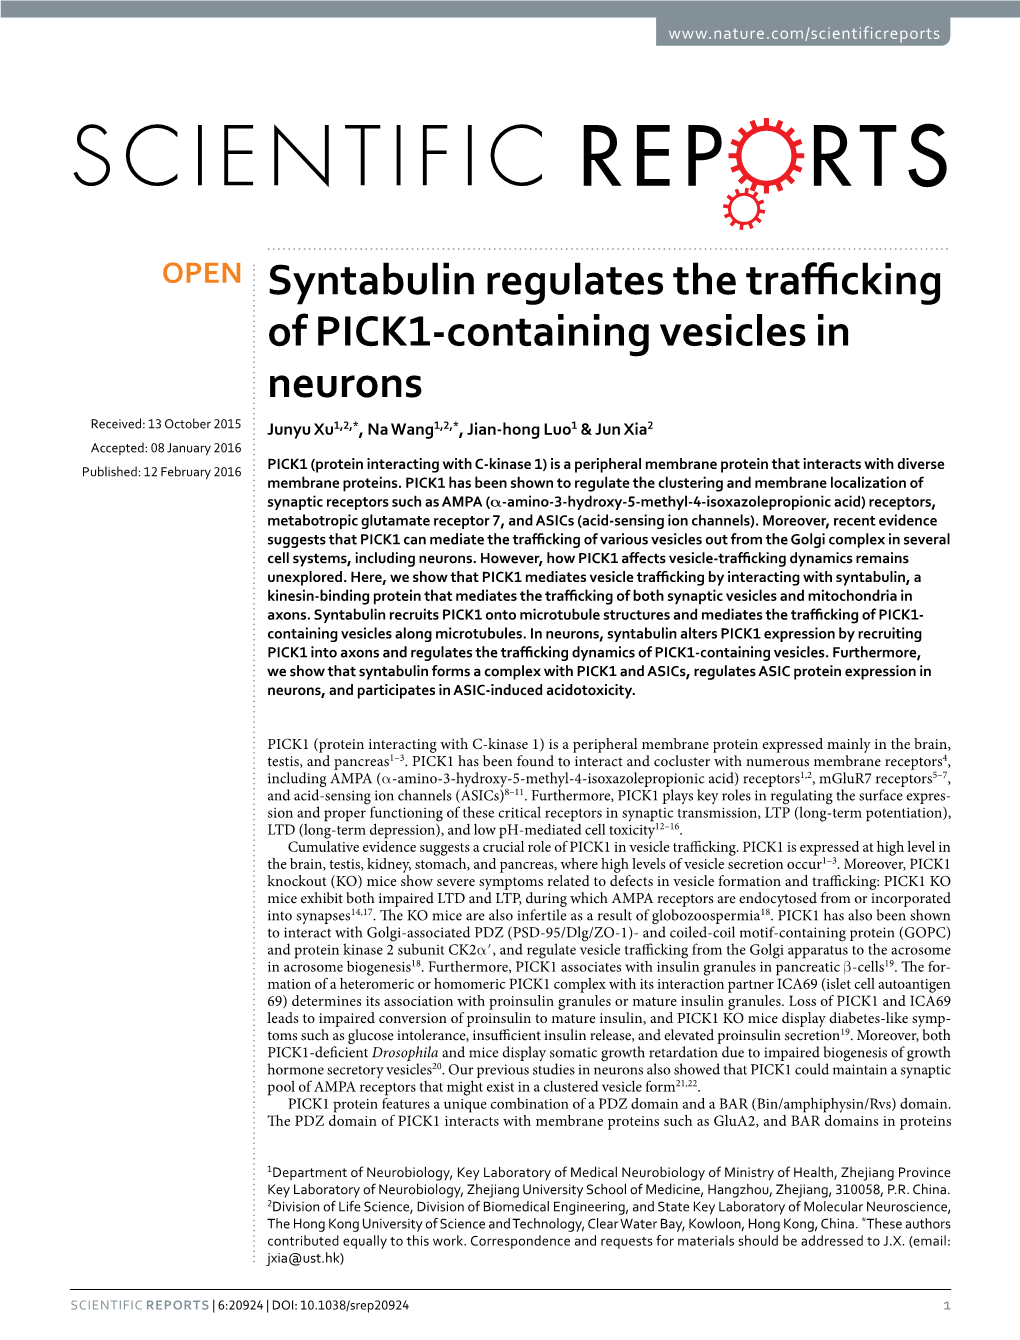 Syntabulin Regulates the Trafficking of PICK1-Containing Vesicles in Neurons